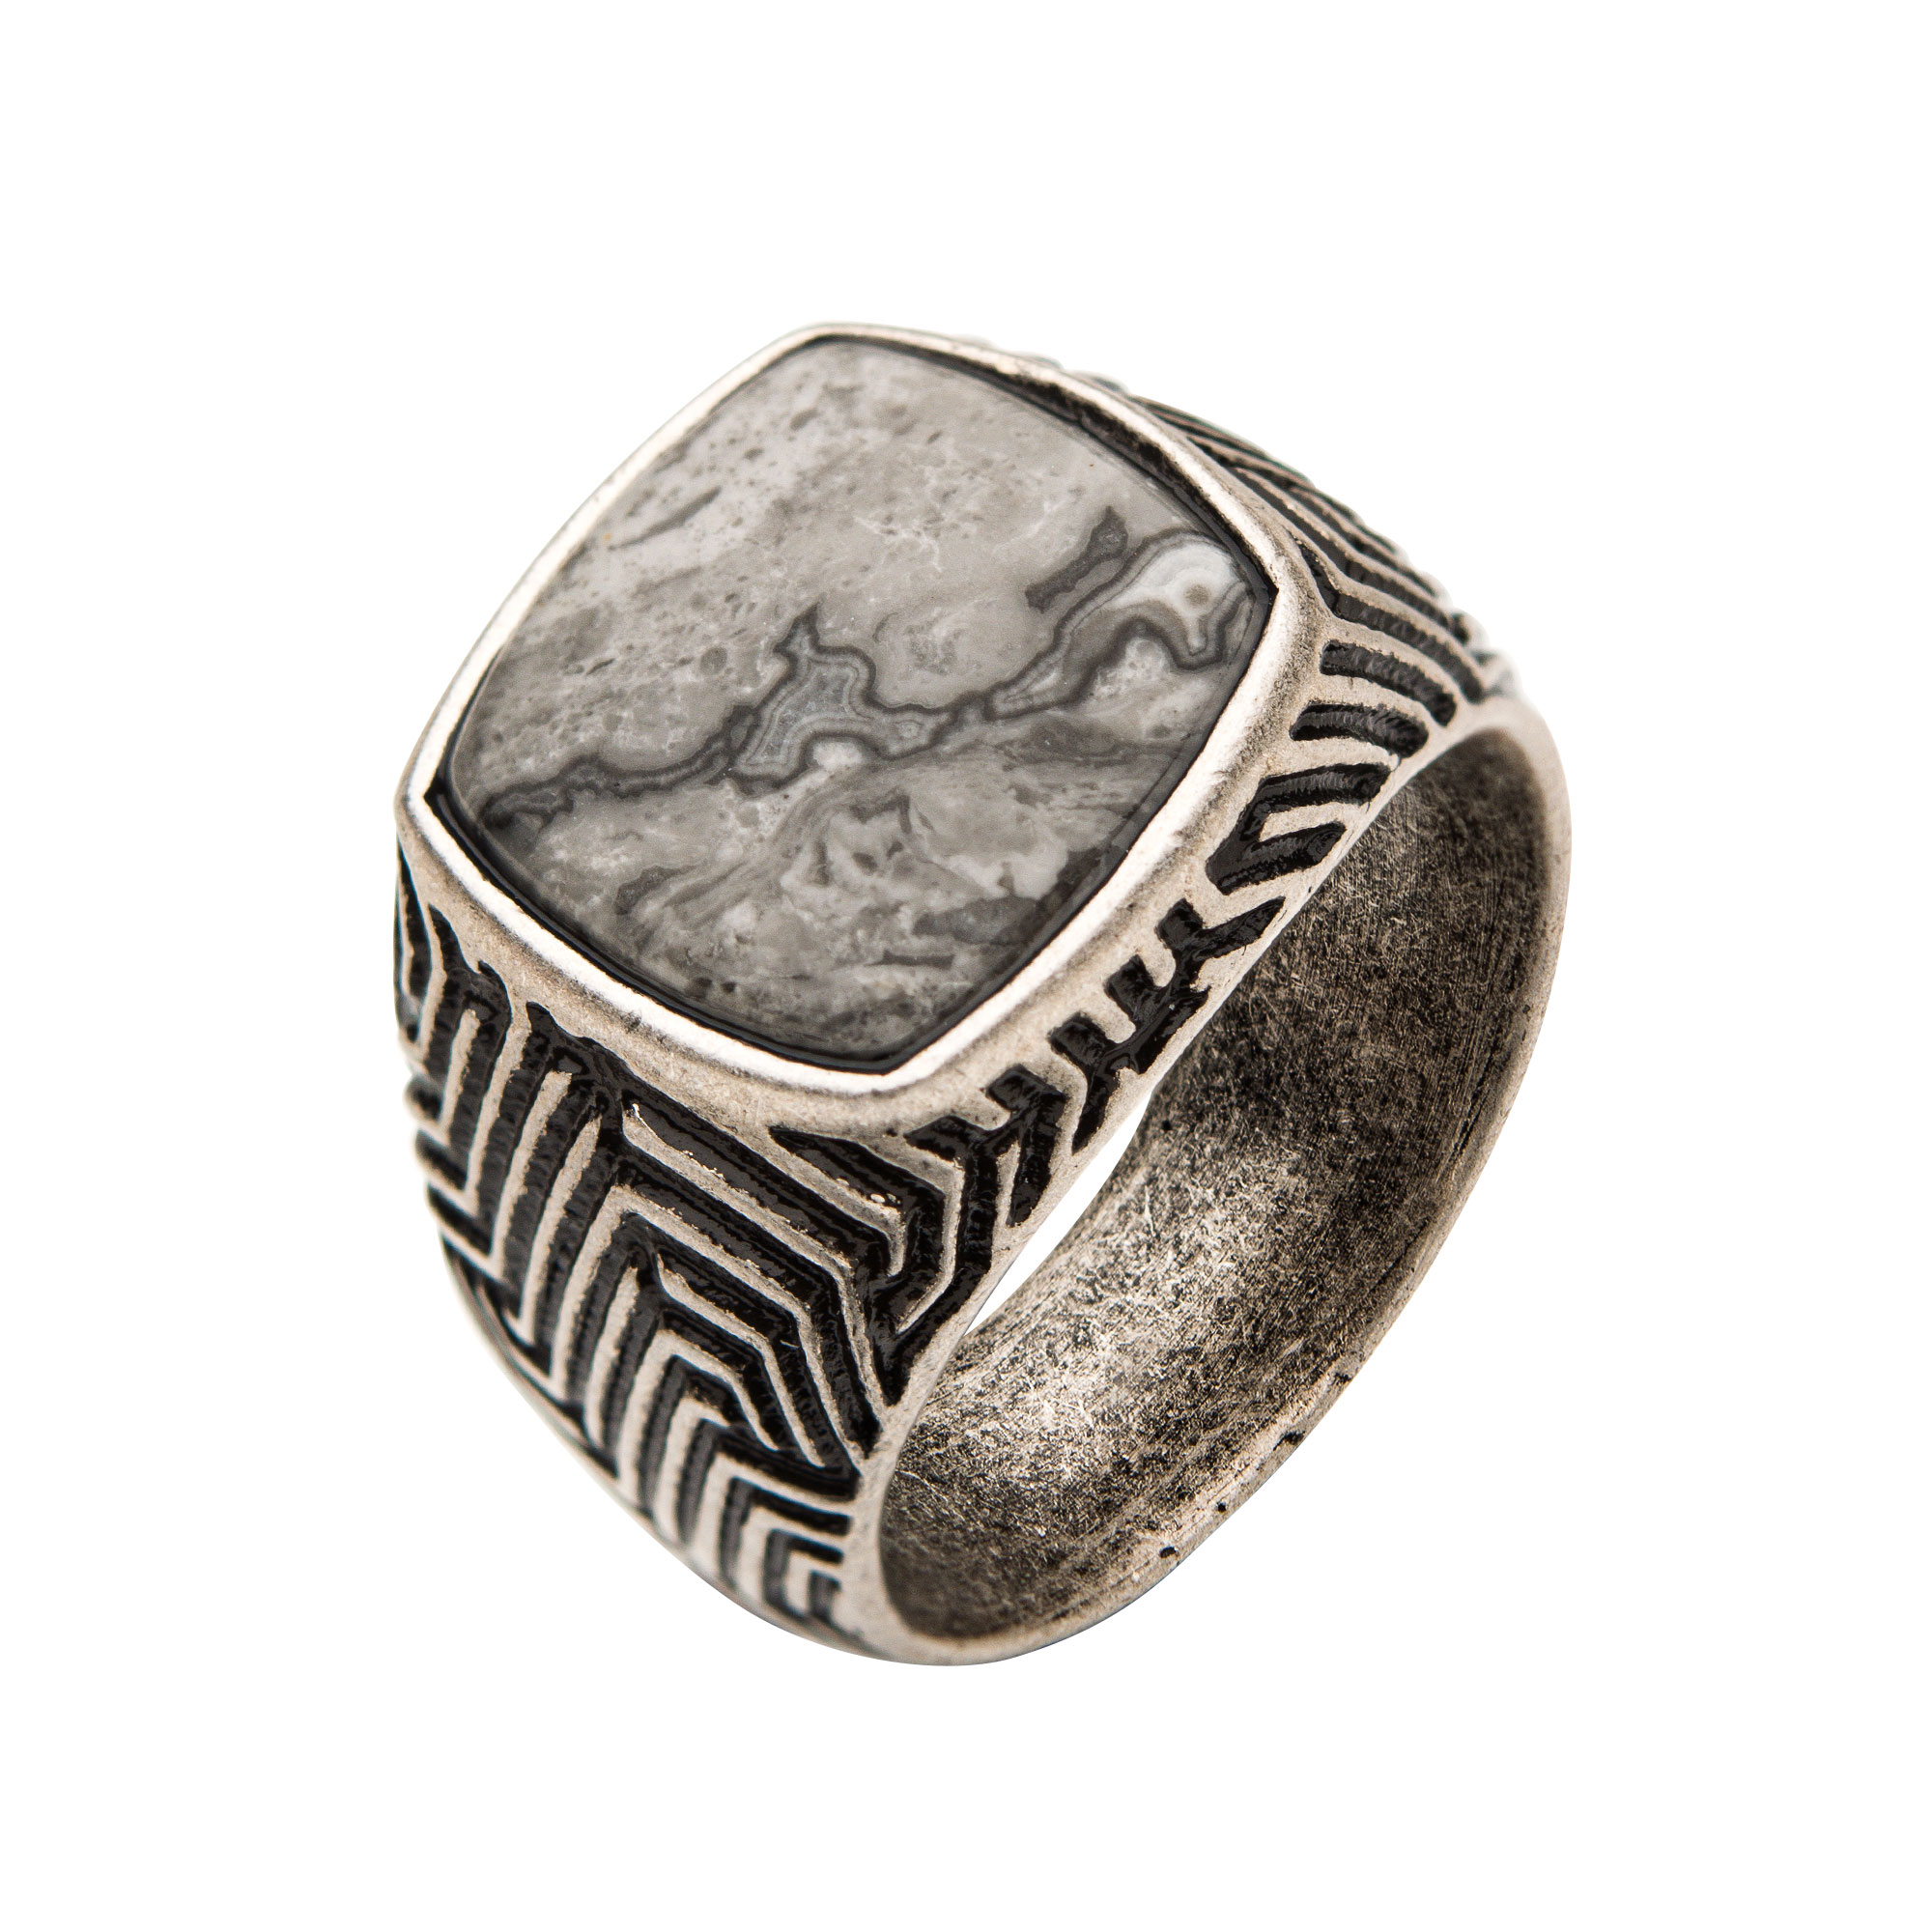 Stainless Steel Silver Plated with Gray Jasper Stone Ring Midtown Diamonds Reno, NV